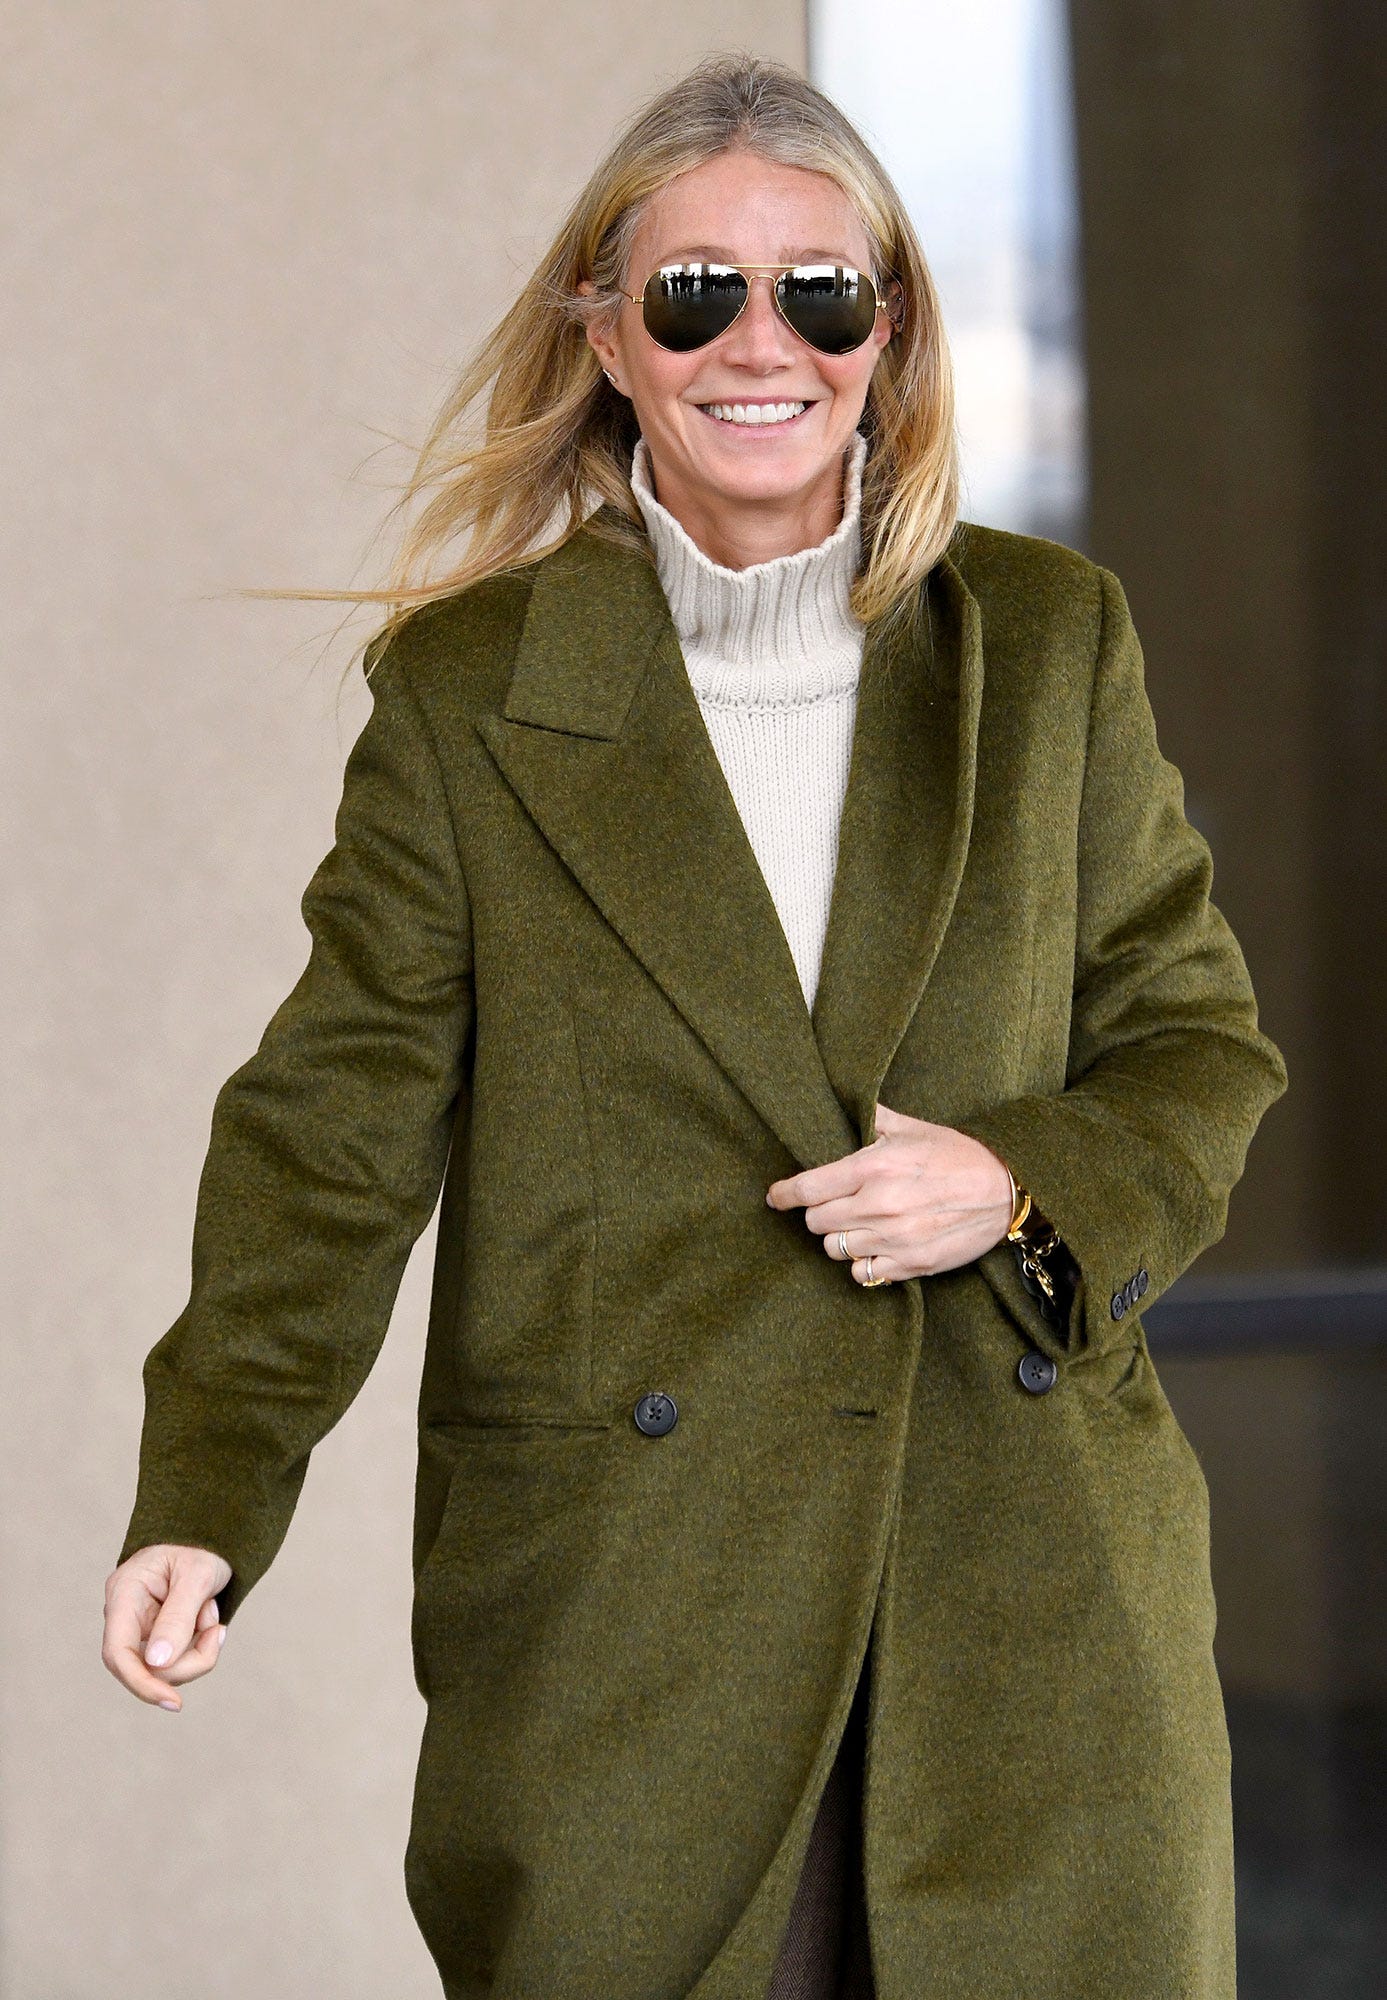 Gwyneth Paltrow's Courtroom Style: See Her Utah Trial Outfits